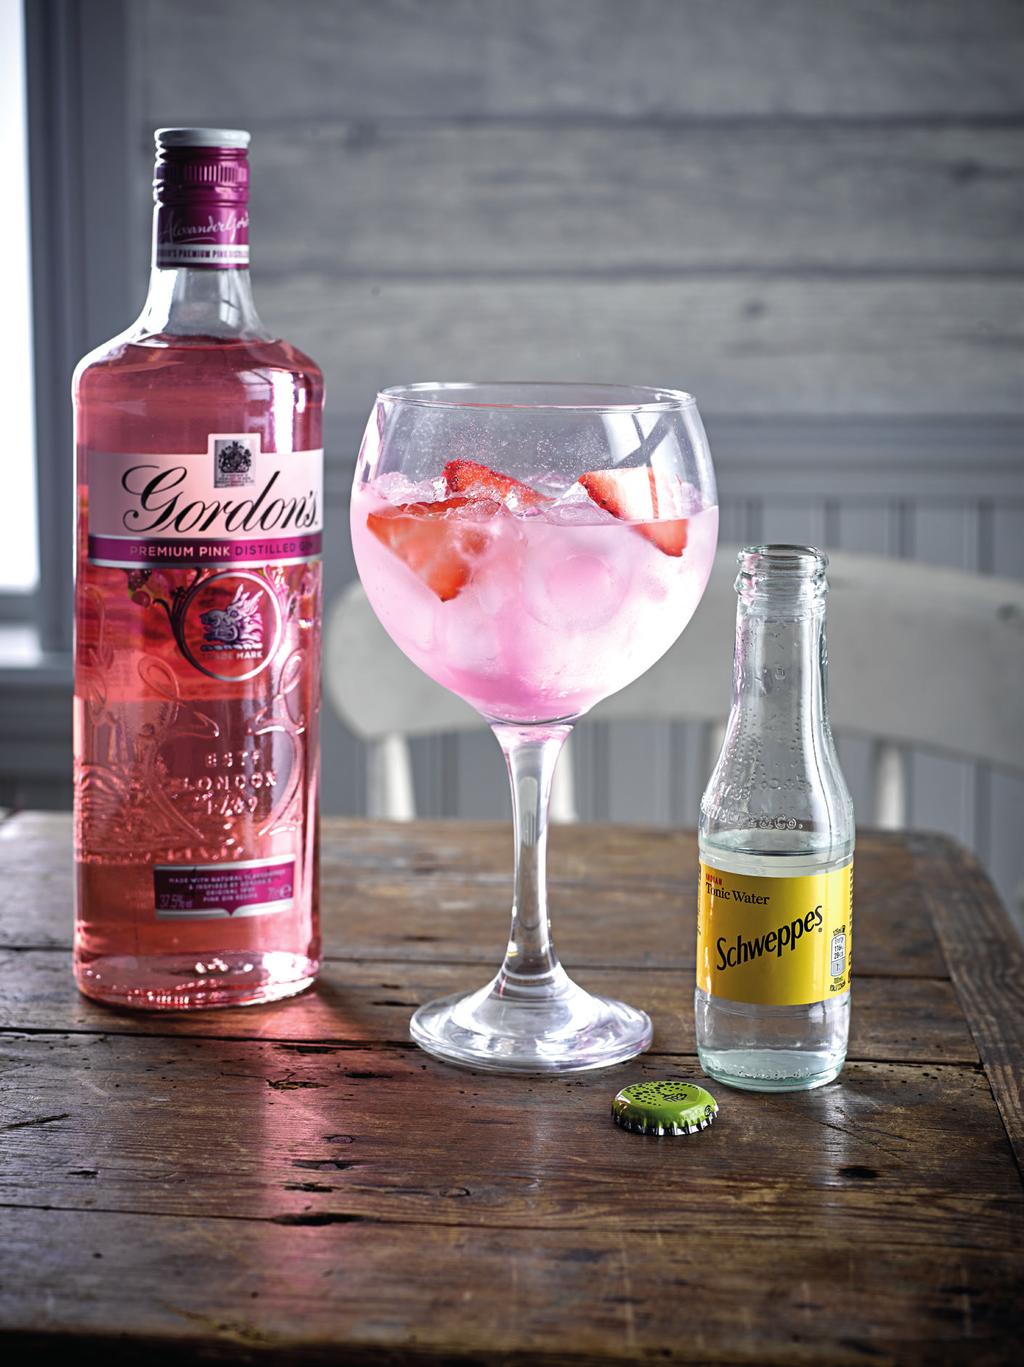 Gin Craze PERFECT WITH SCHWEPPES, OR UPGRADE TO FEVER-TREE TONIC Double Up ON ANY SPIRIT for just 1.50 extra Tanqueray No. TEN Perfect with Fever-Tree Tonic Water.